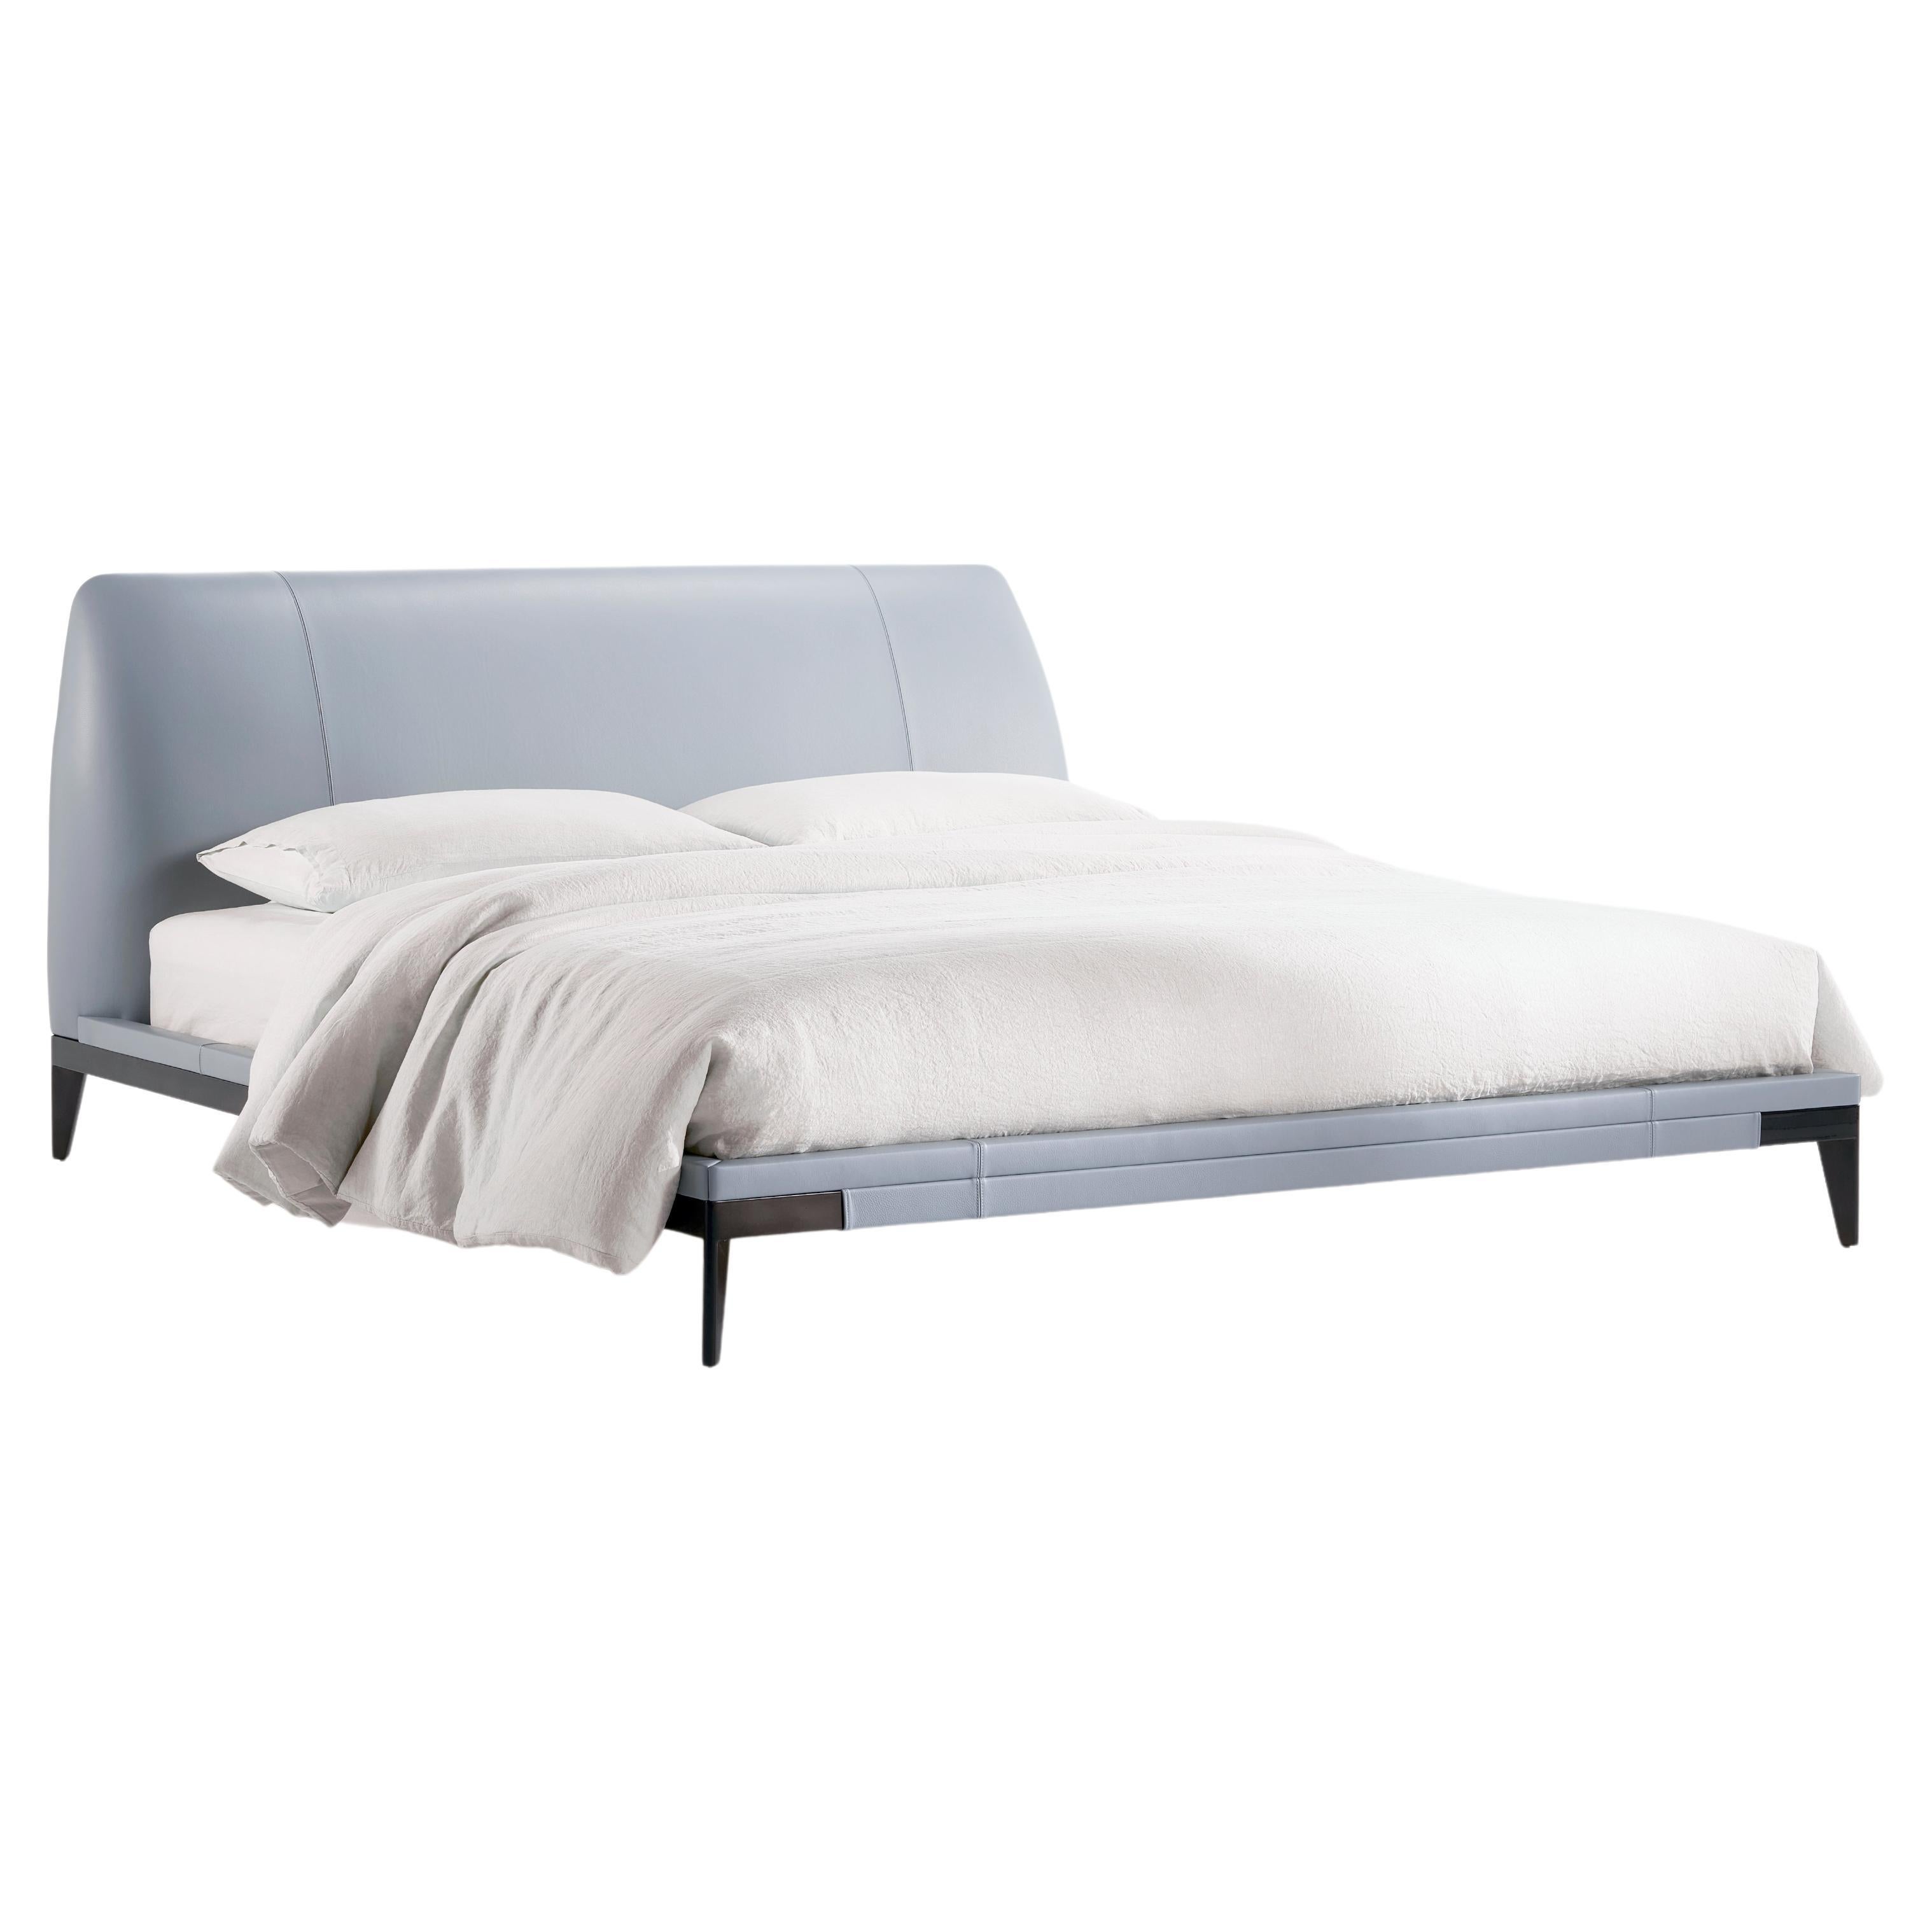 ADESSO bed in light blue genuine leather and metal base. By Legame Italia For Sale